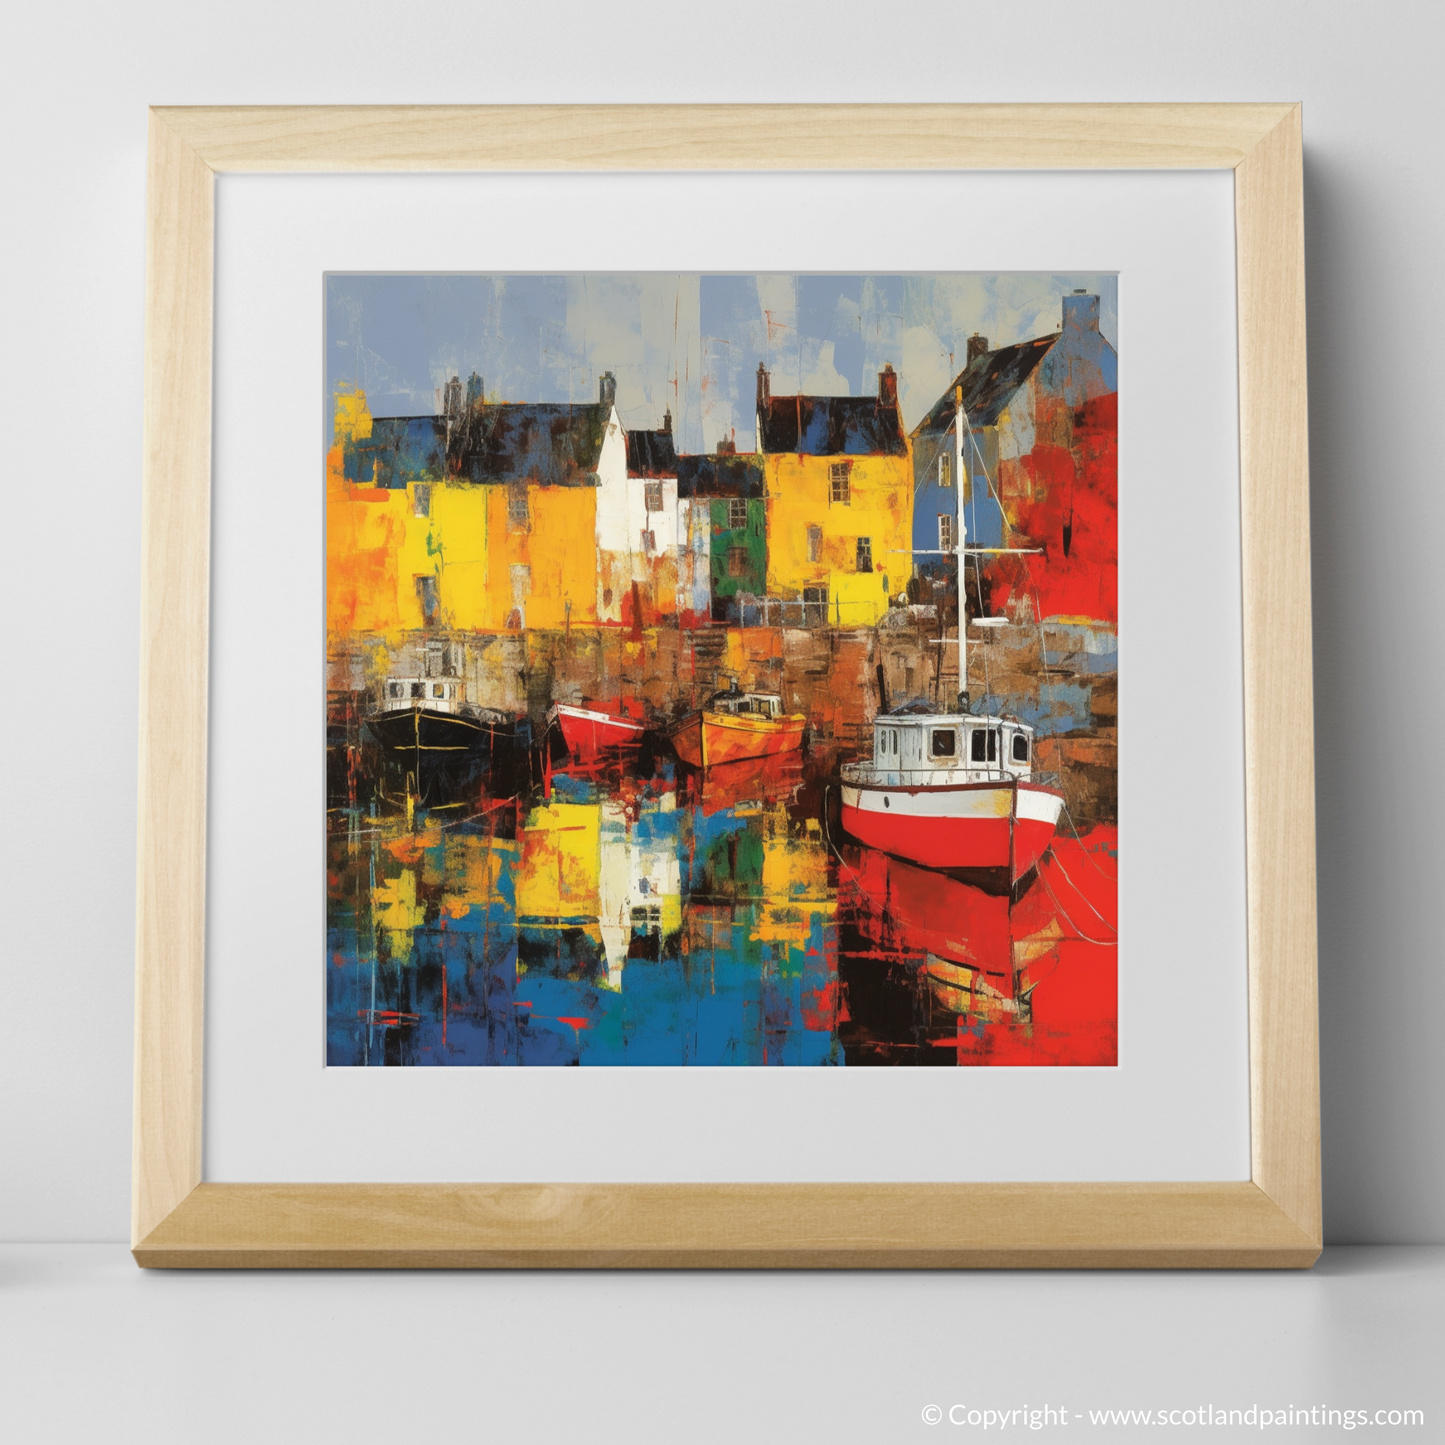 Tobermory Harbour at Golden Hour: A Pop Art Odyssey